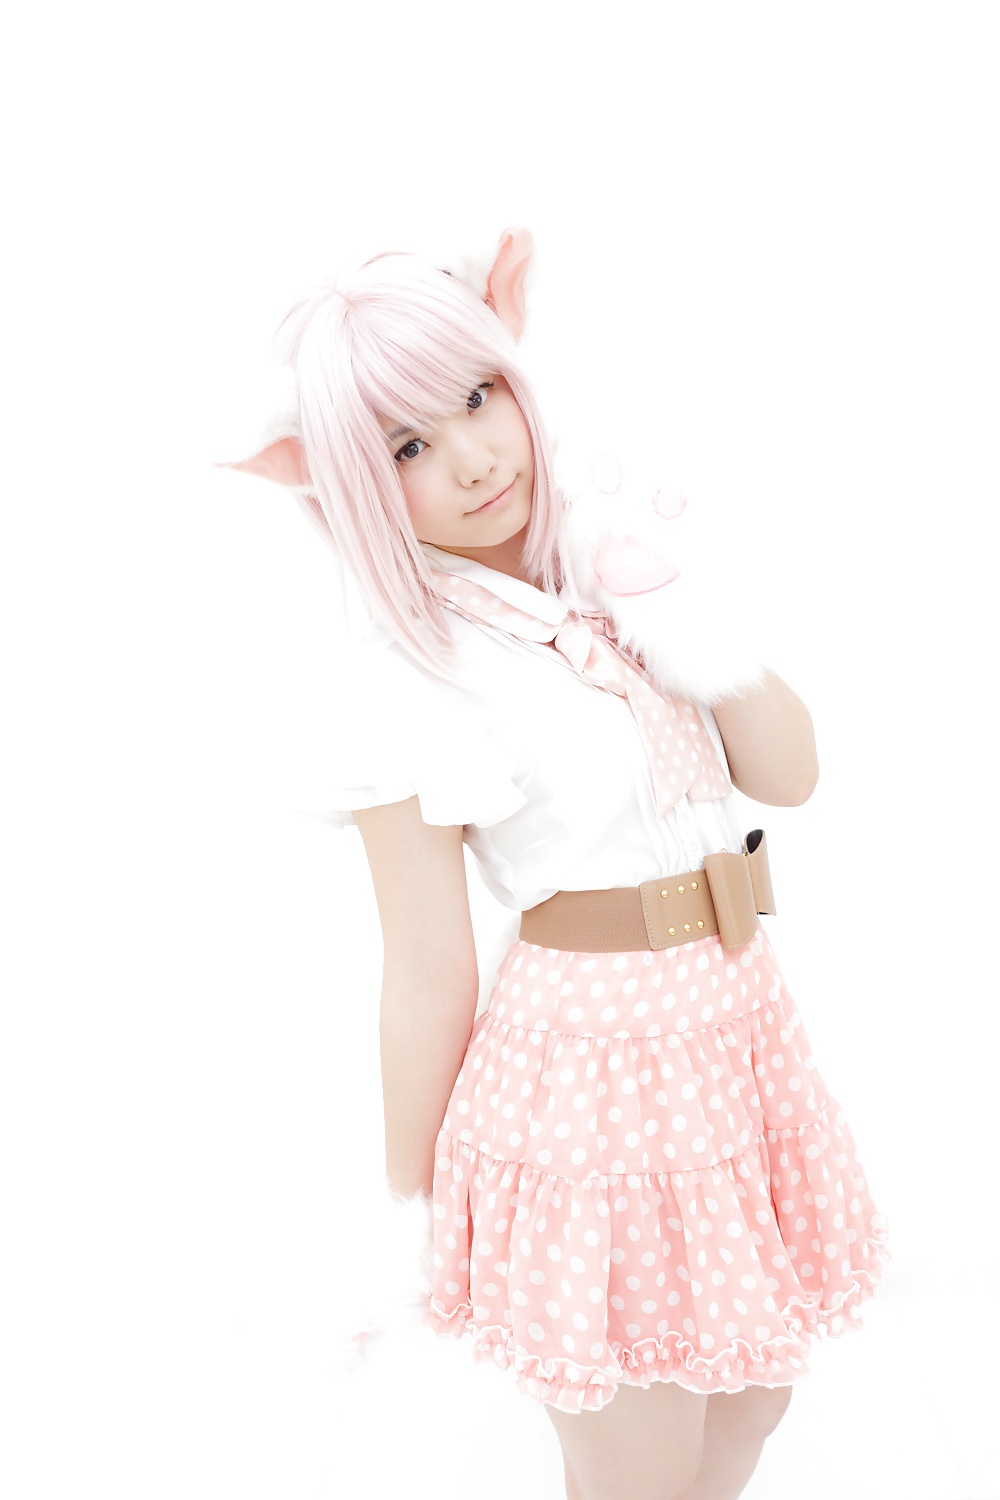 Asiatica cosplay in bianco
 #26558623